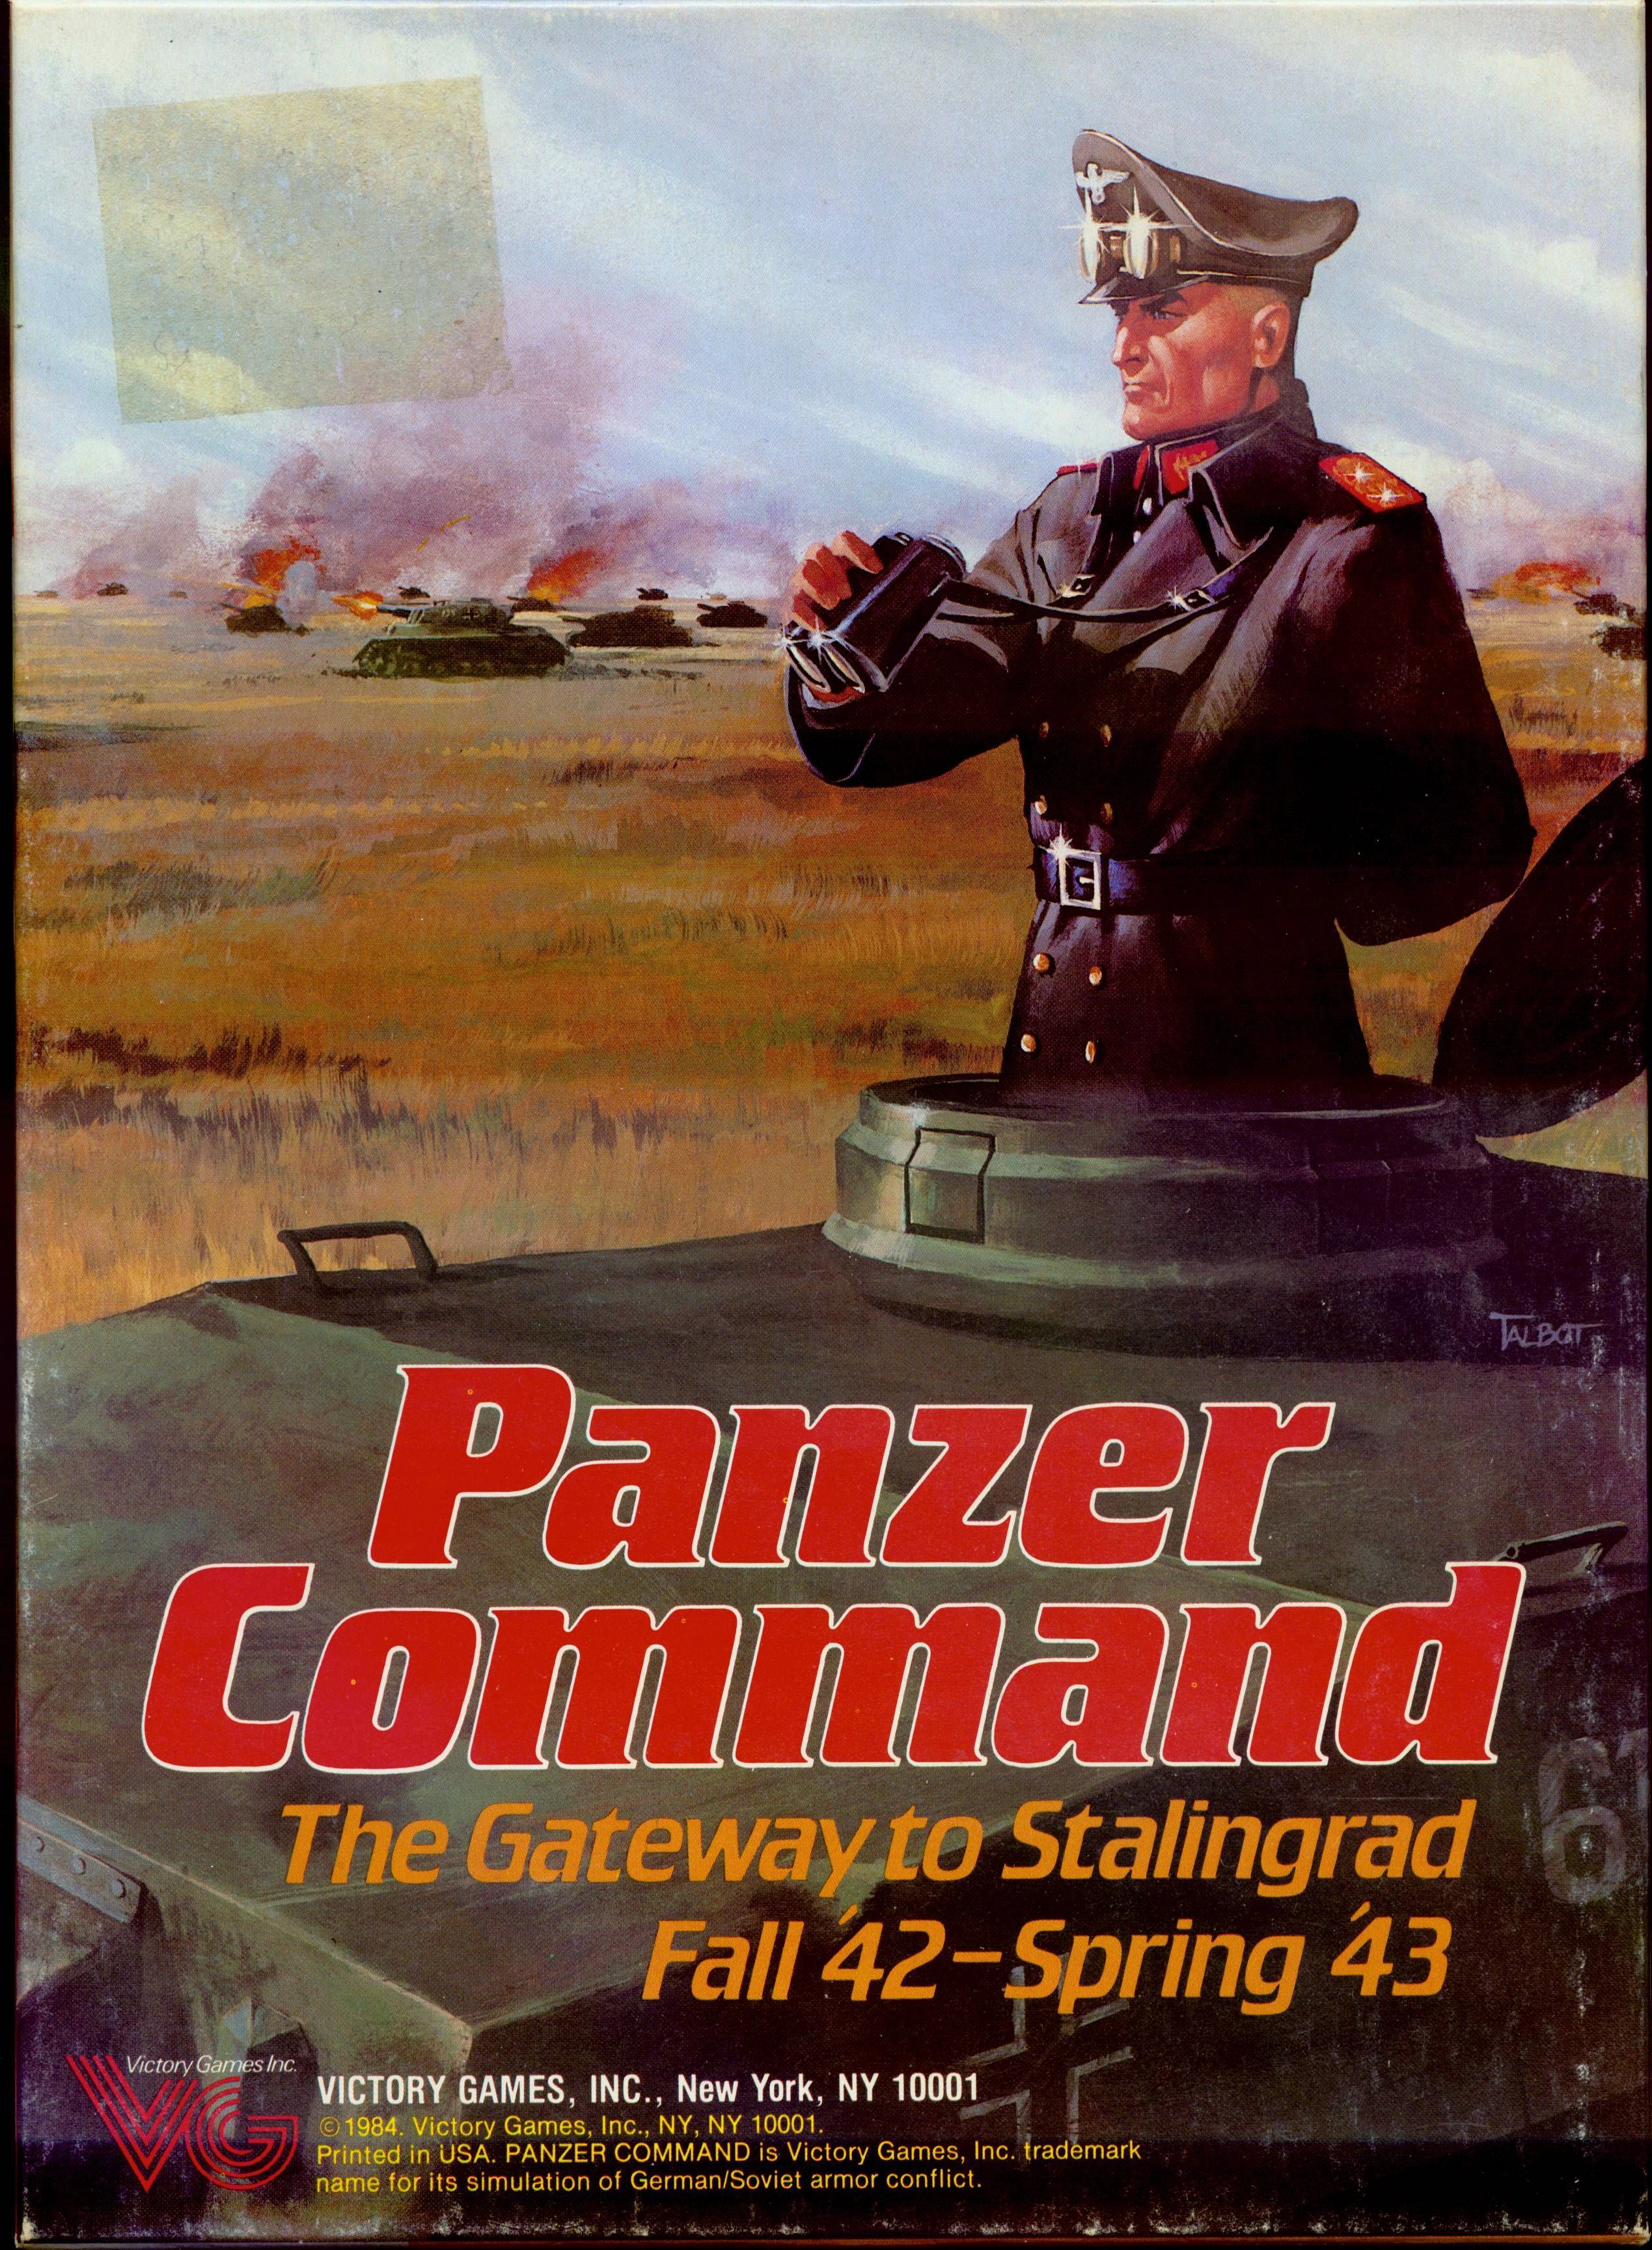 Panzer Command: The Gateway to Stalingrad Fall '42-Spring '43